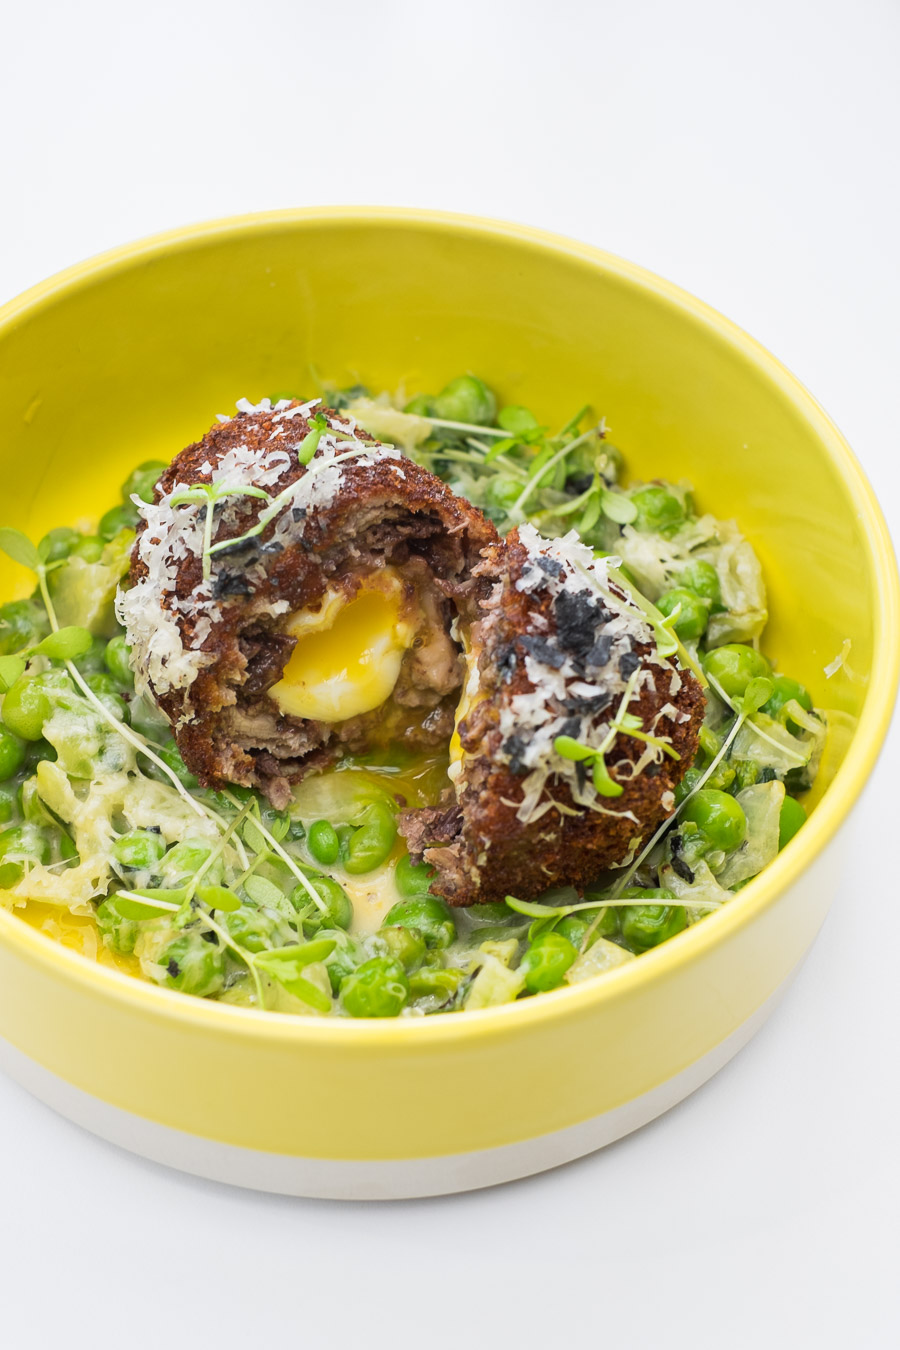 Scotch quail egg, boudin noir, braised peas and lettuce (AU$18 - from the All Day Brunch Menu)